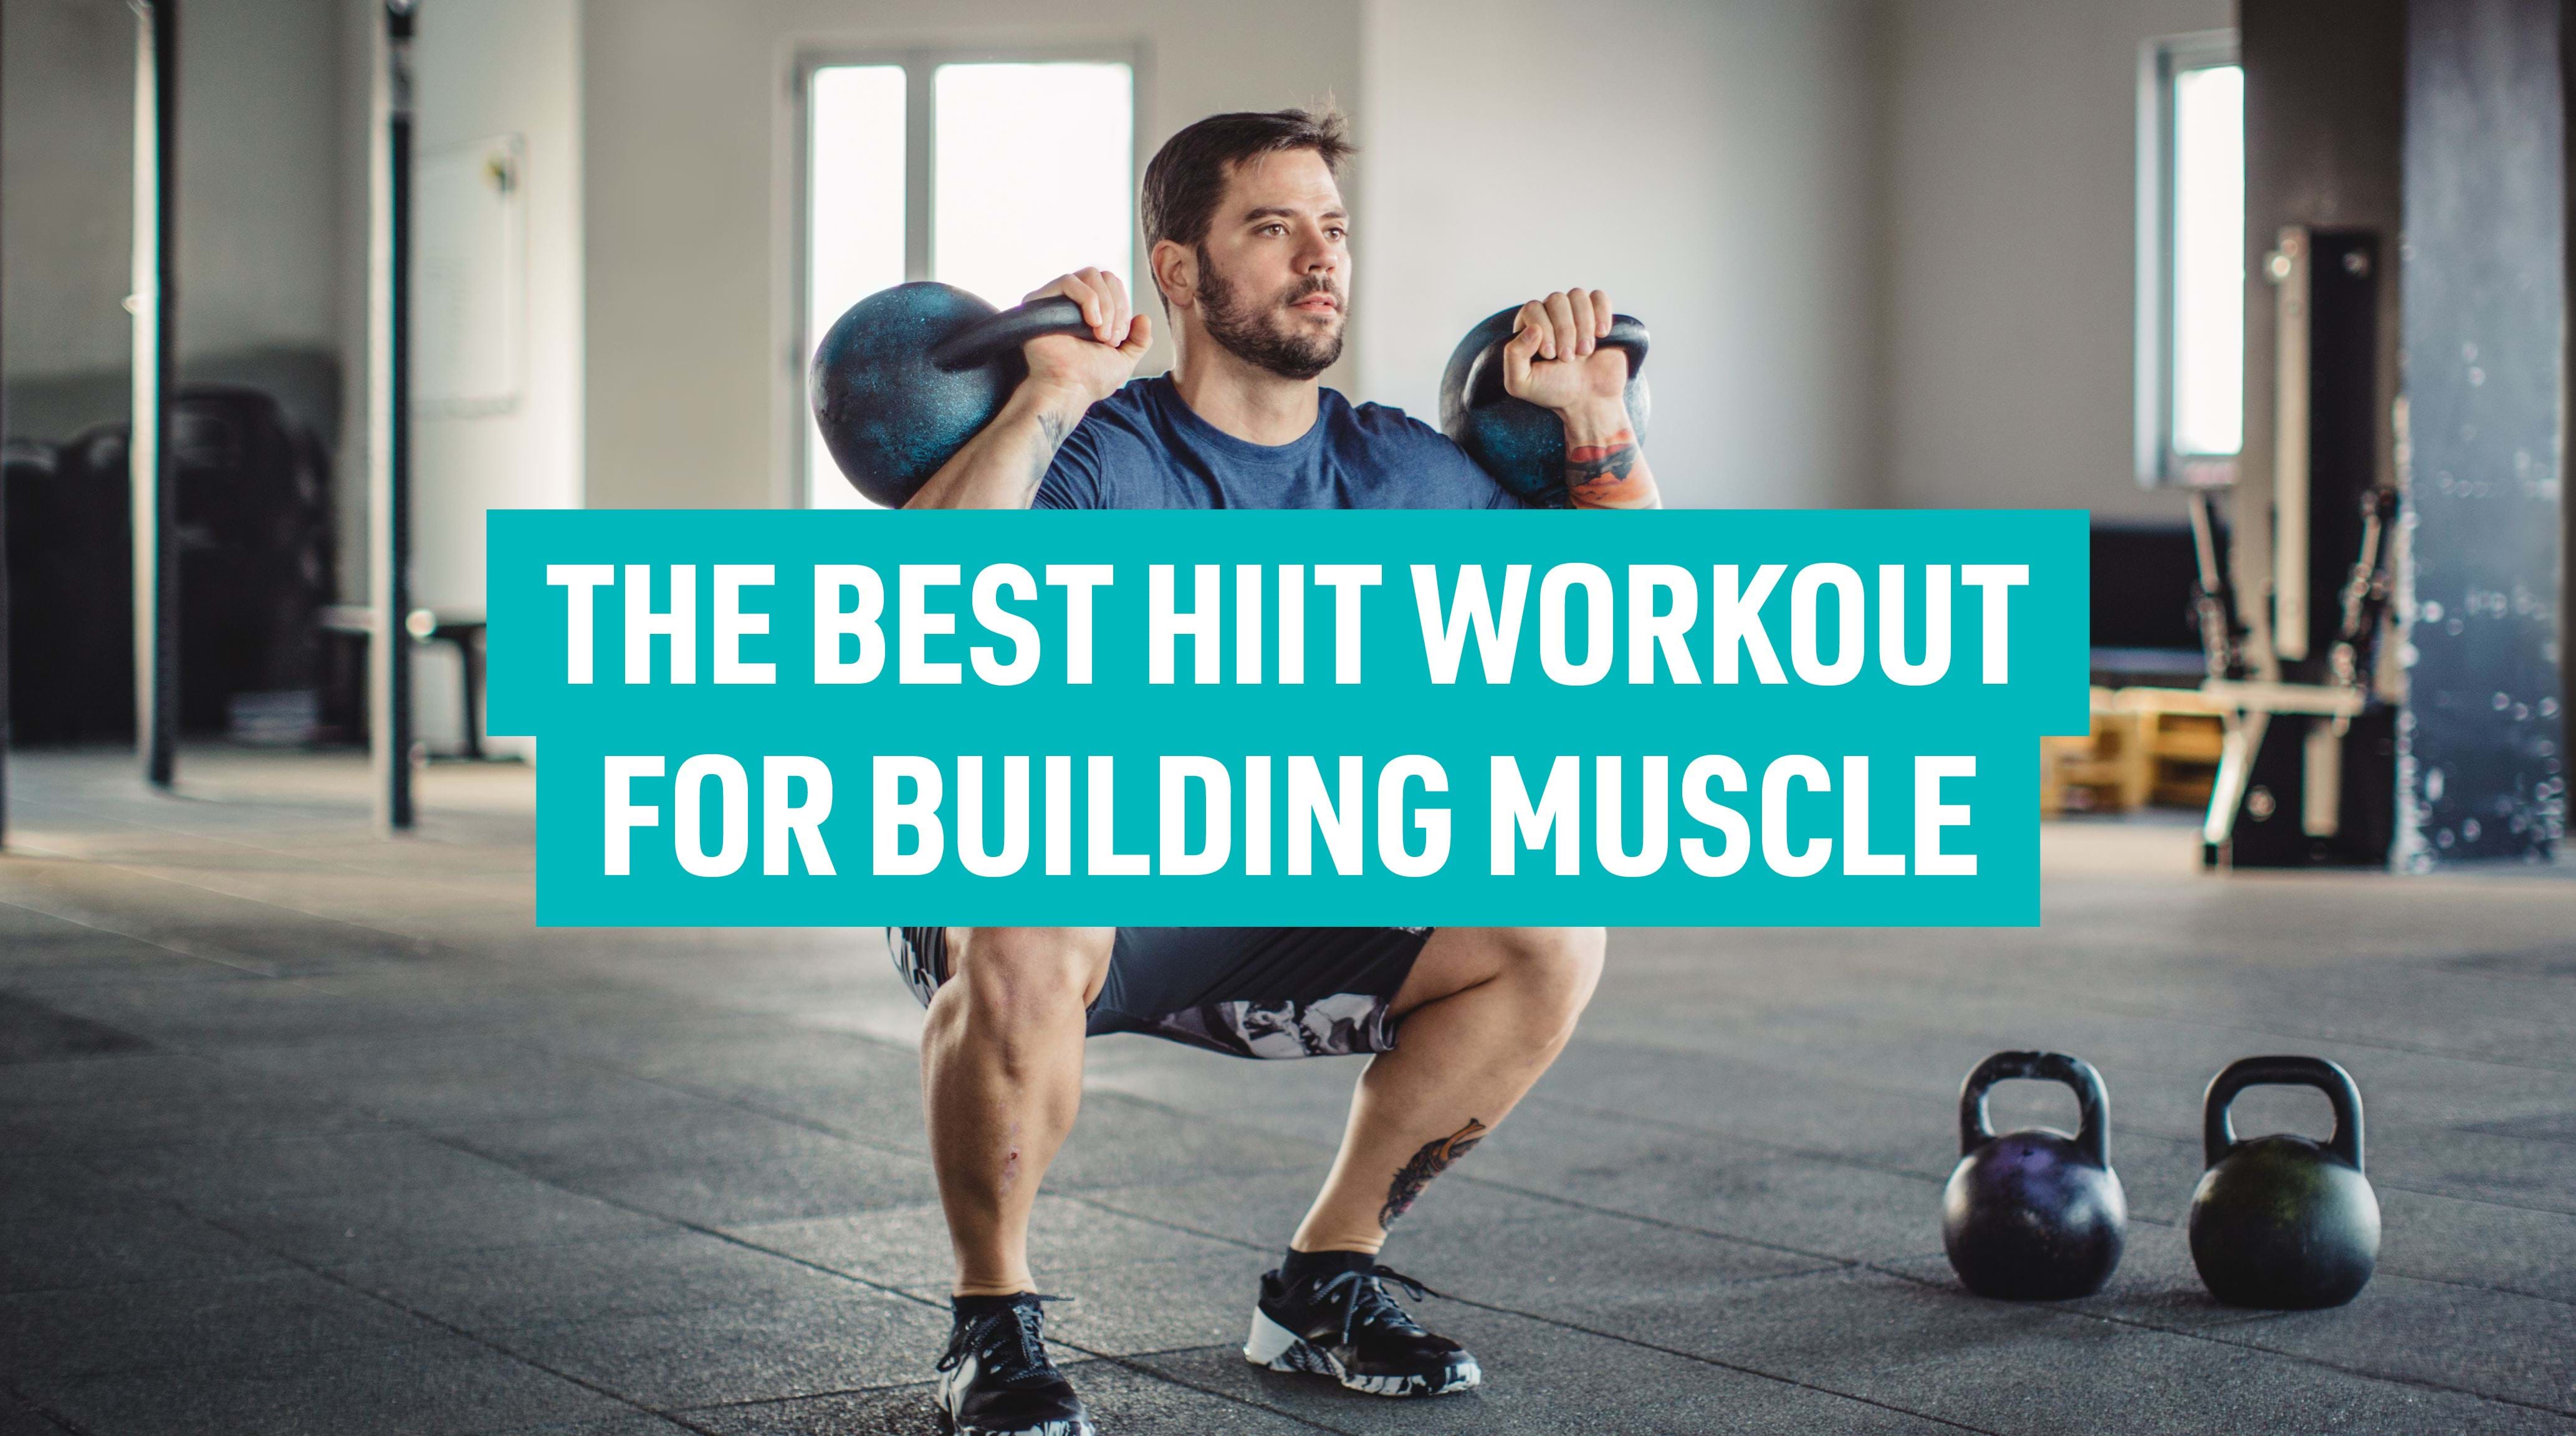 The Best Quad Exercises and Workouts for Building Muscle